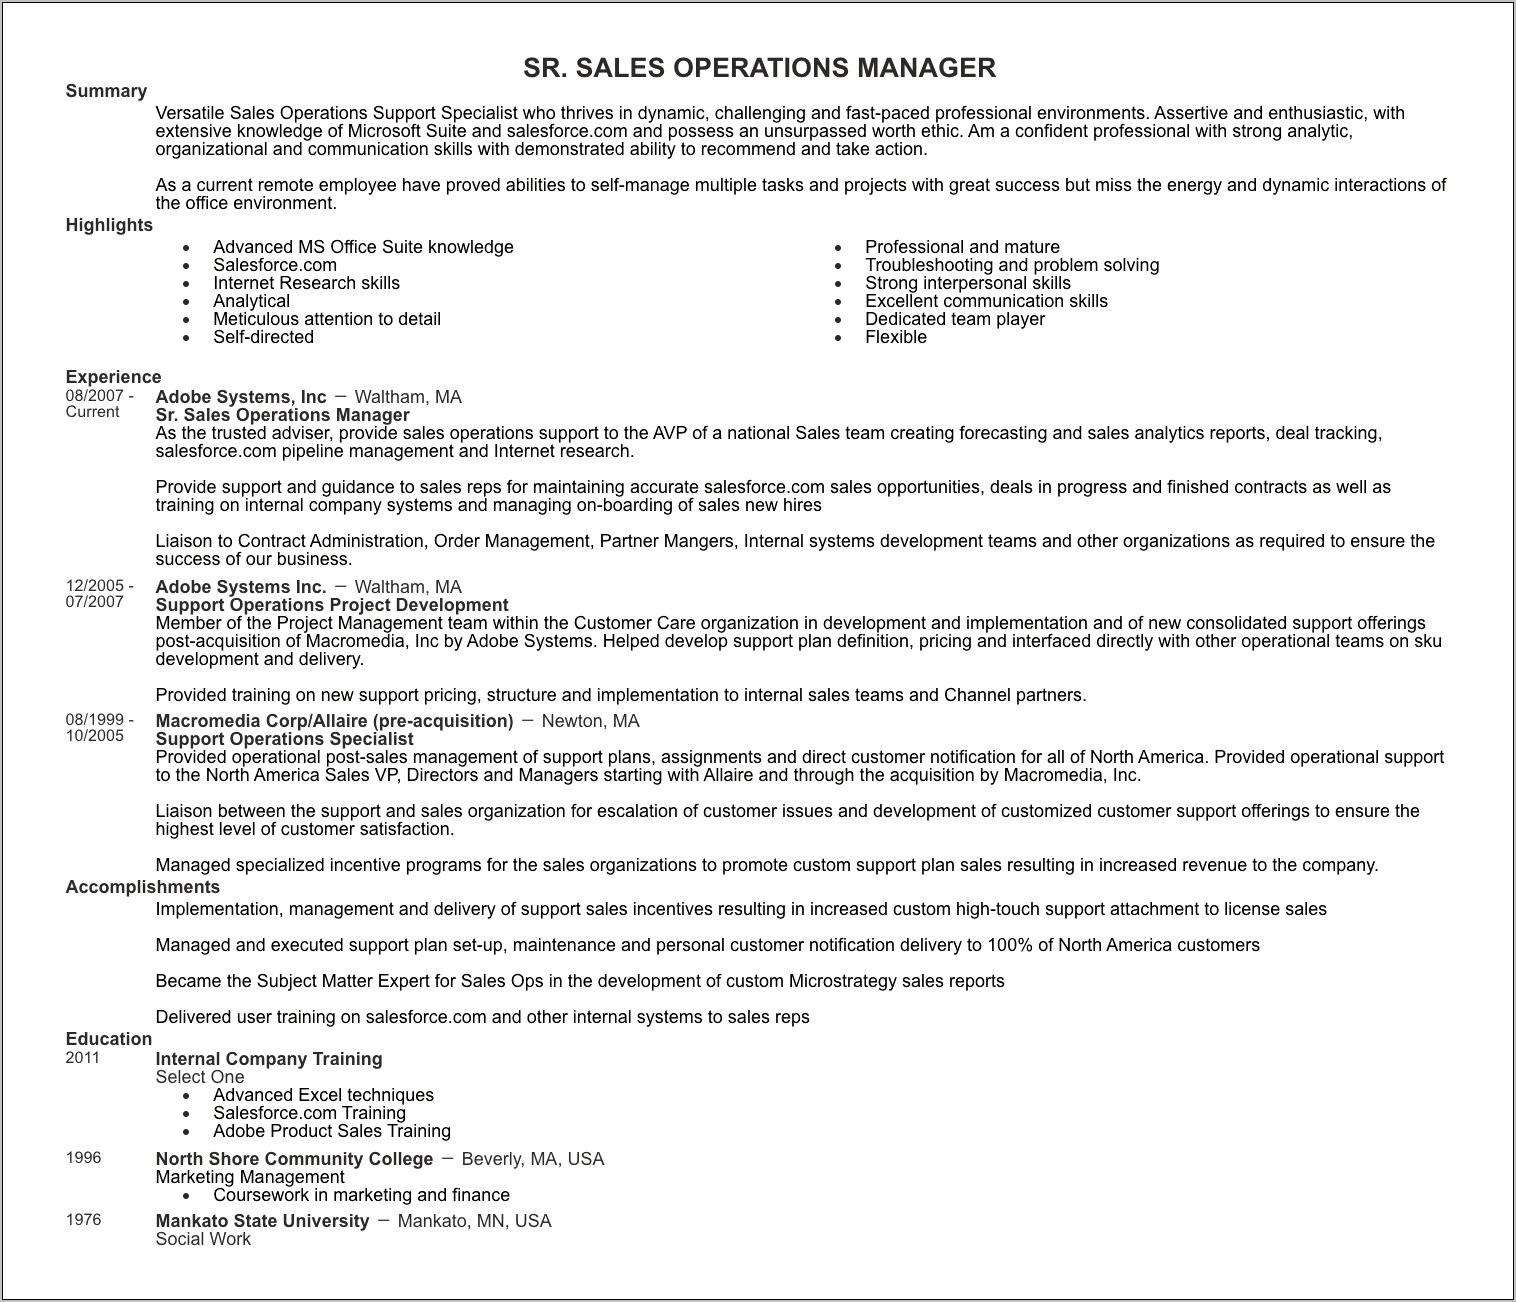 Should You Personalize Summary In Resume